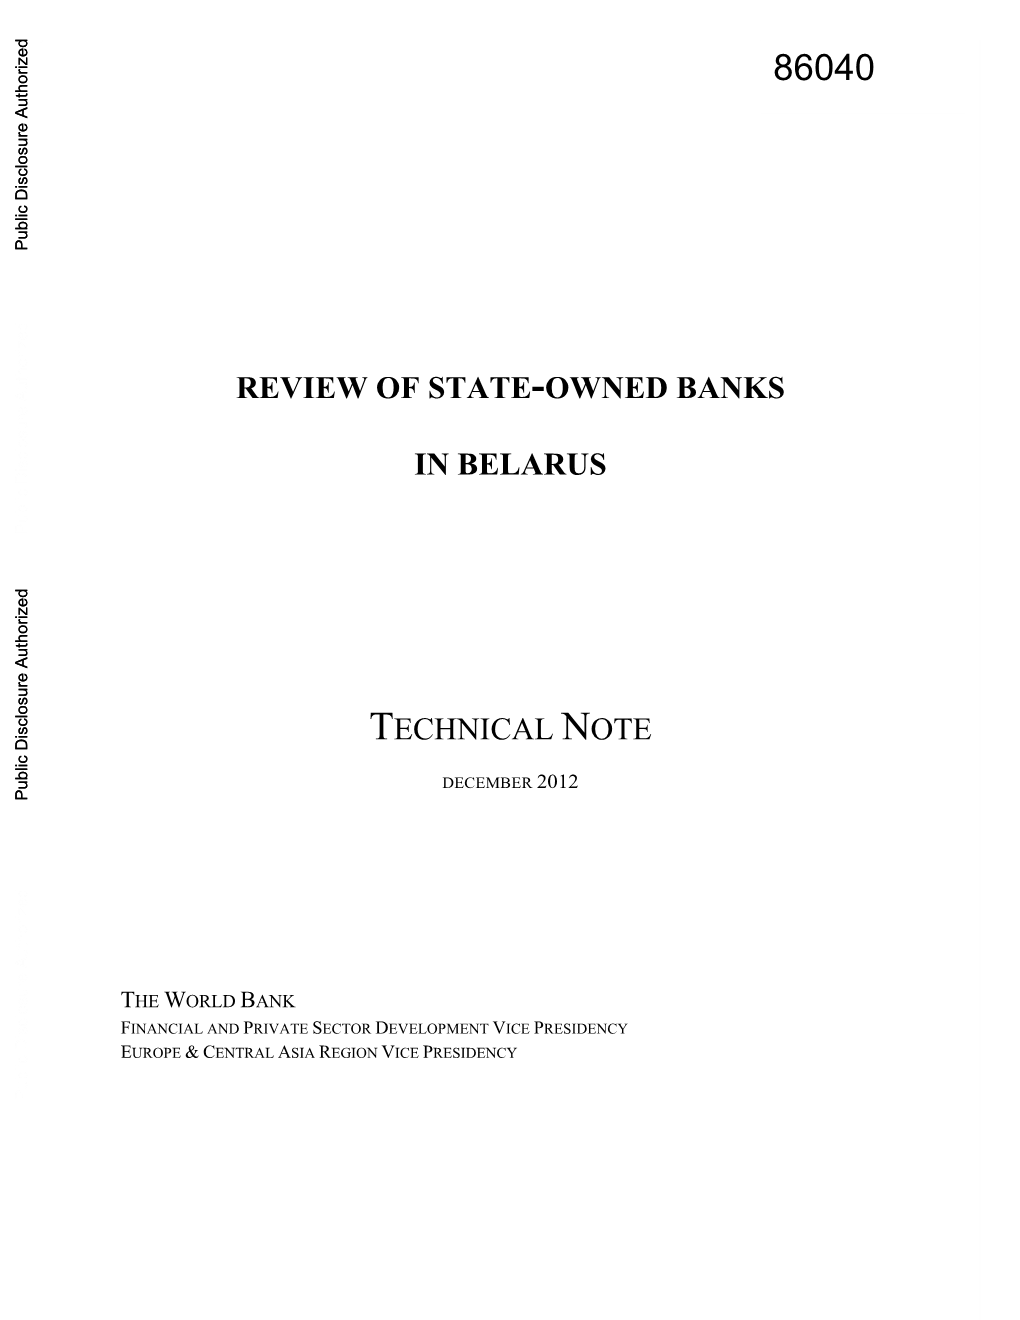 Review of State-Owned Banks in Belarus